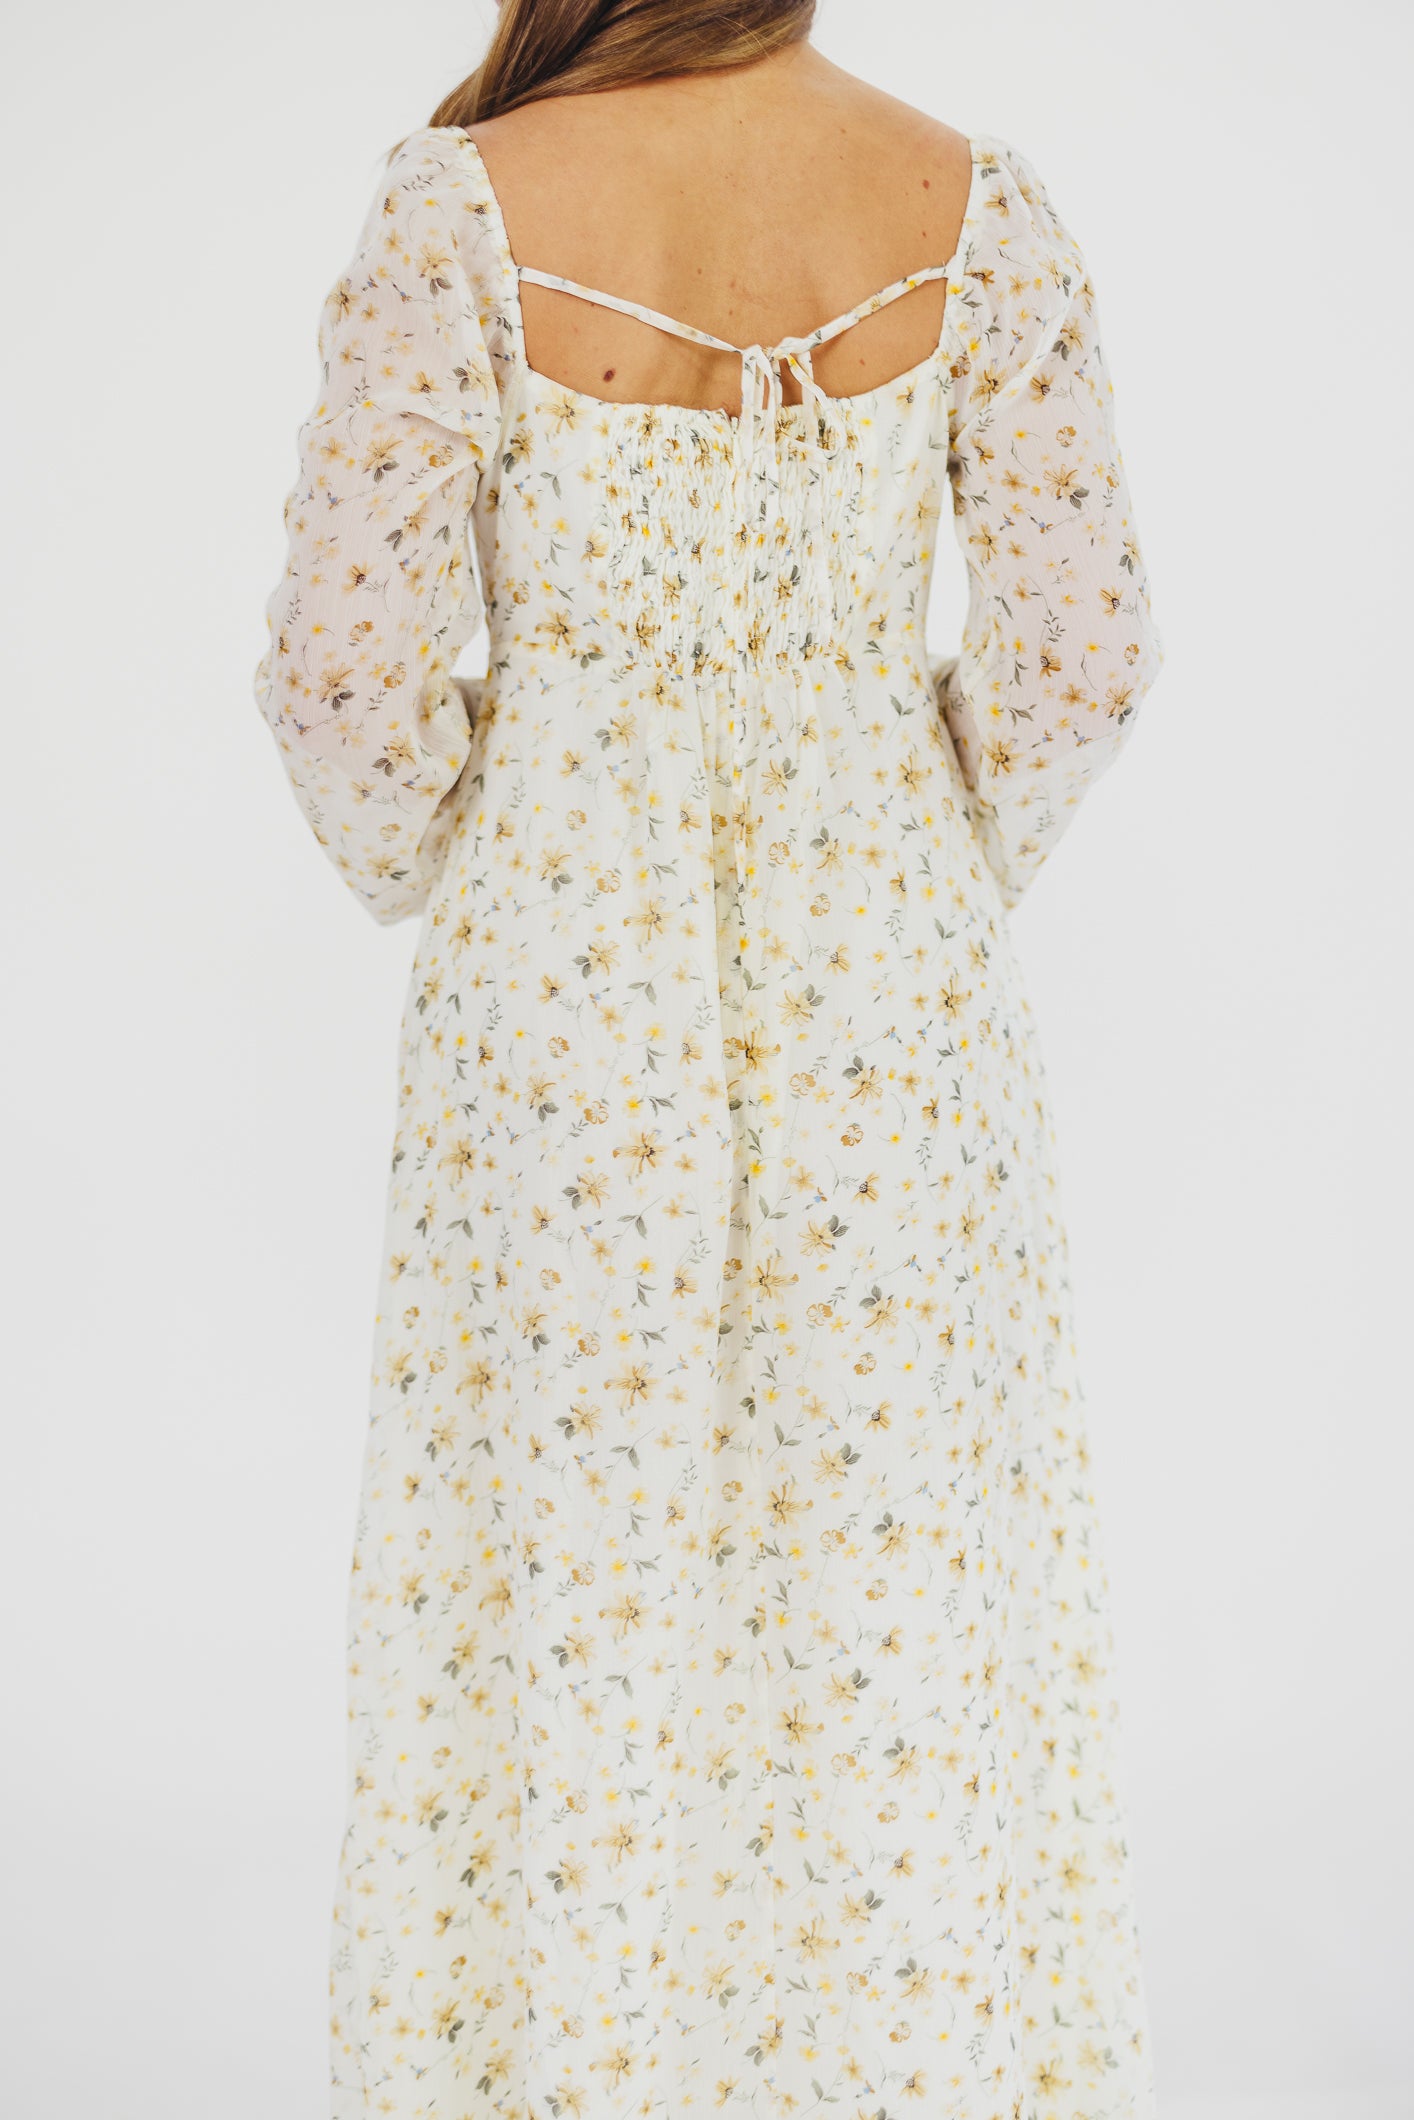 Parker Smocked Maxi Dress with Puffed Sleeves in Ivory/Yellow - Bump Friendly & Inclusive Sizing (S-3XL)